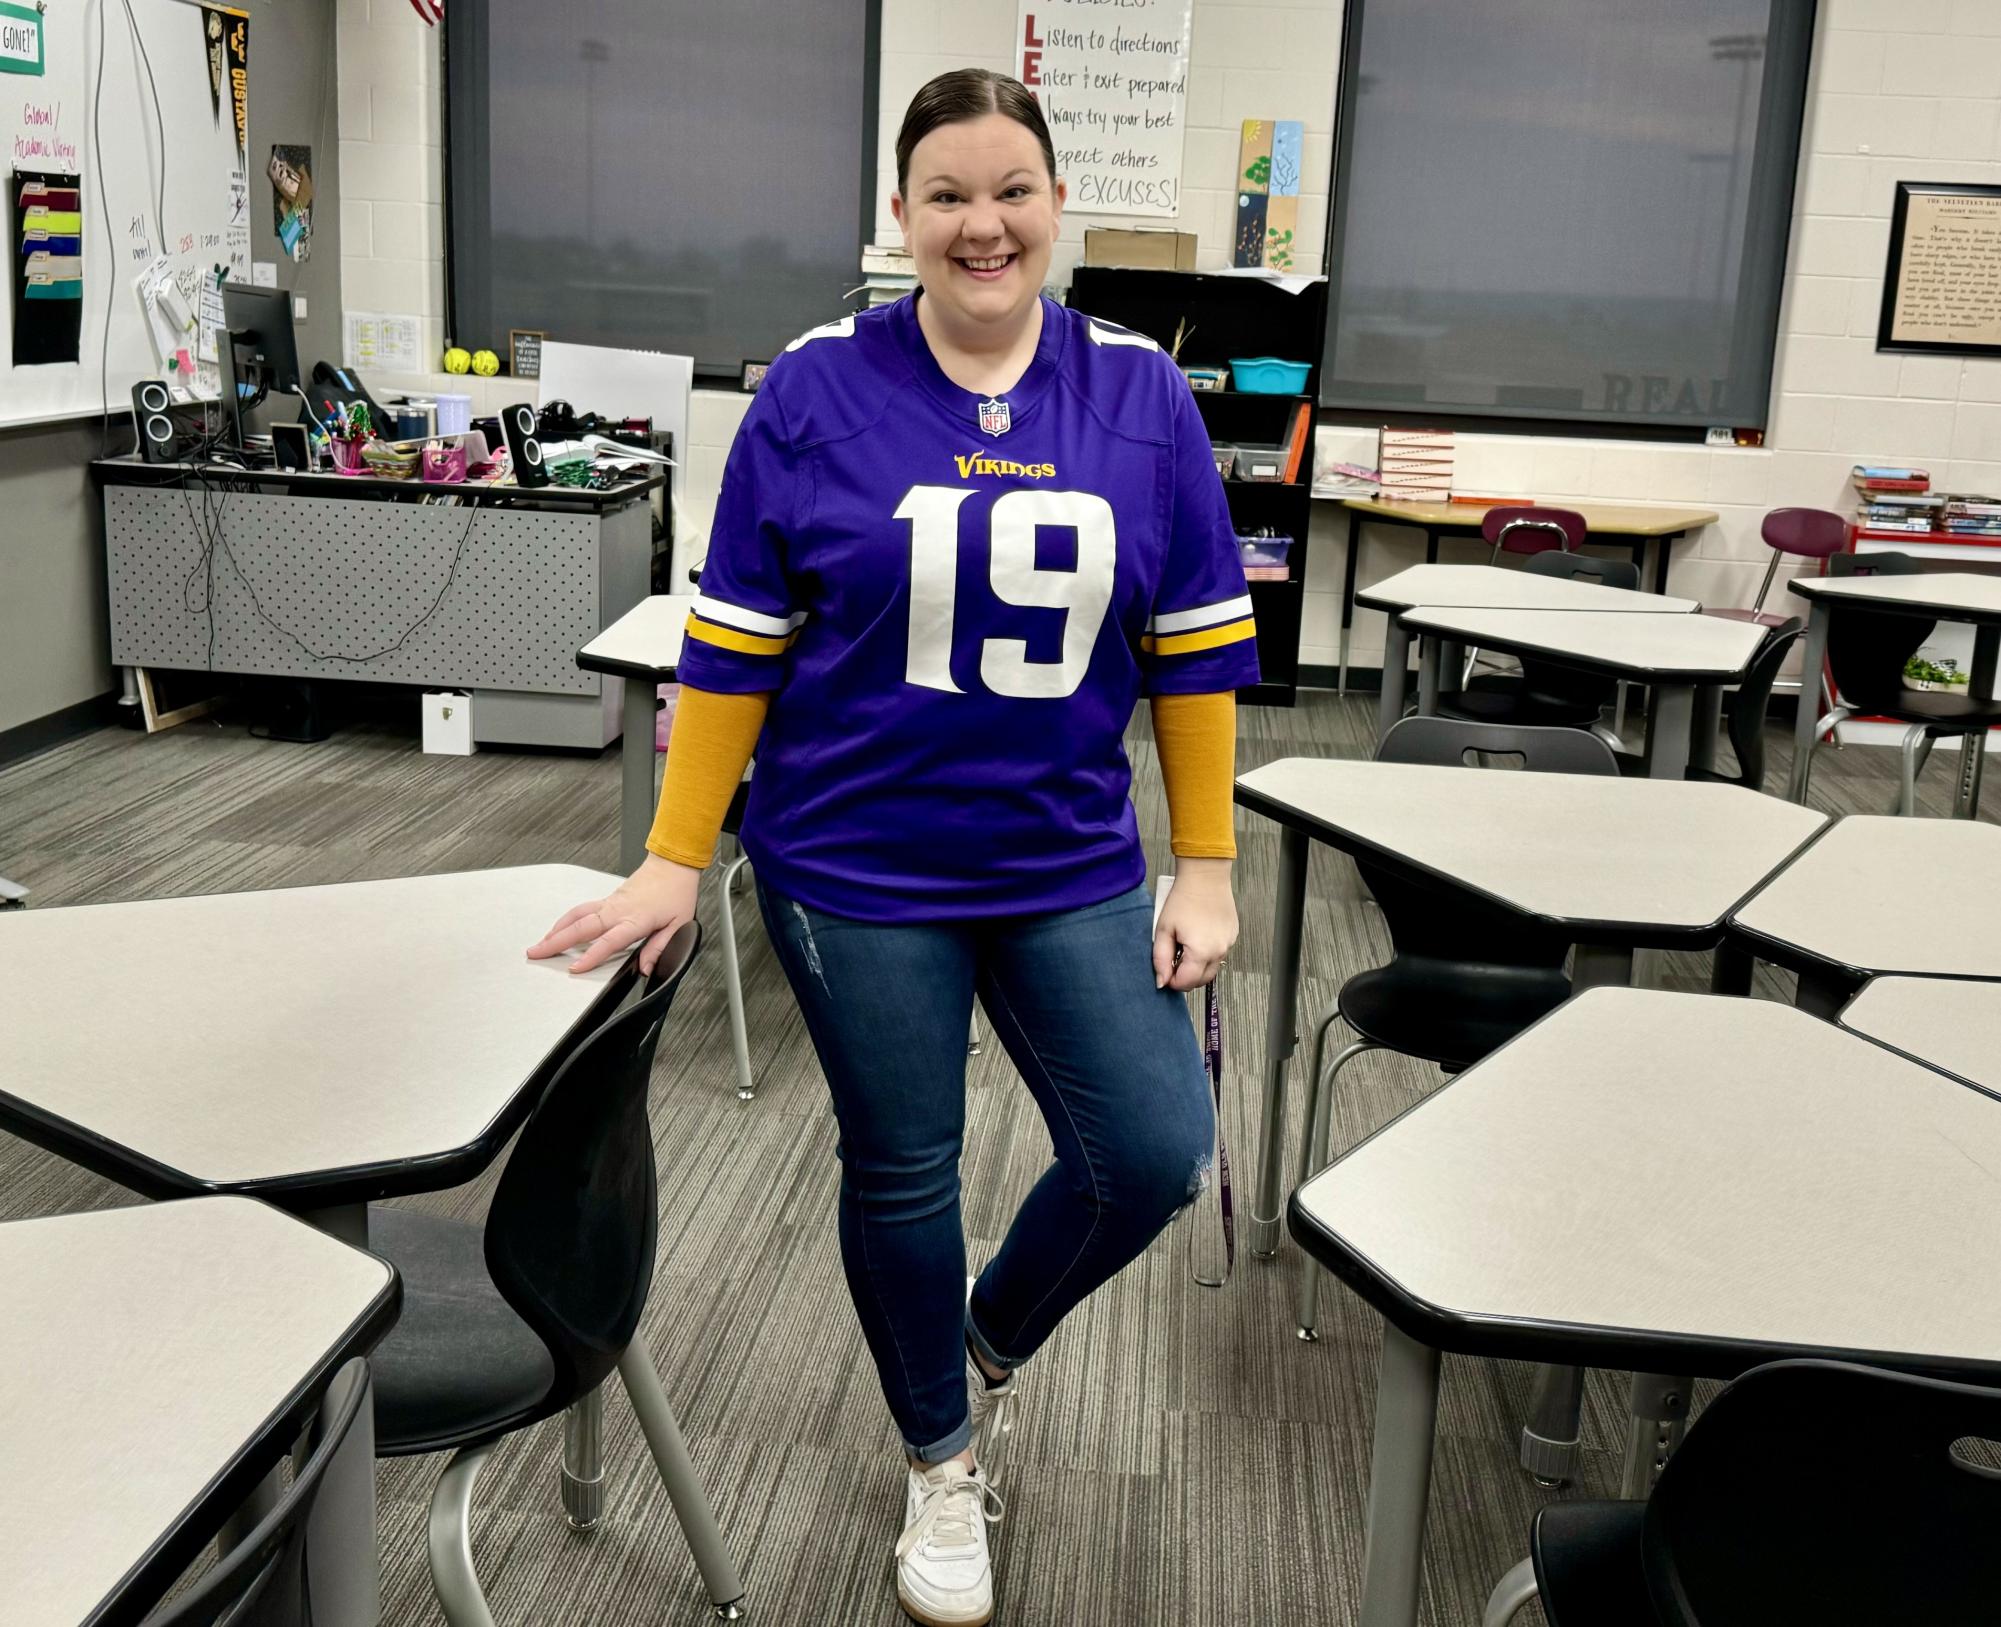 Mrs. Marlow supporting Snow Week and showing real school spirit.